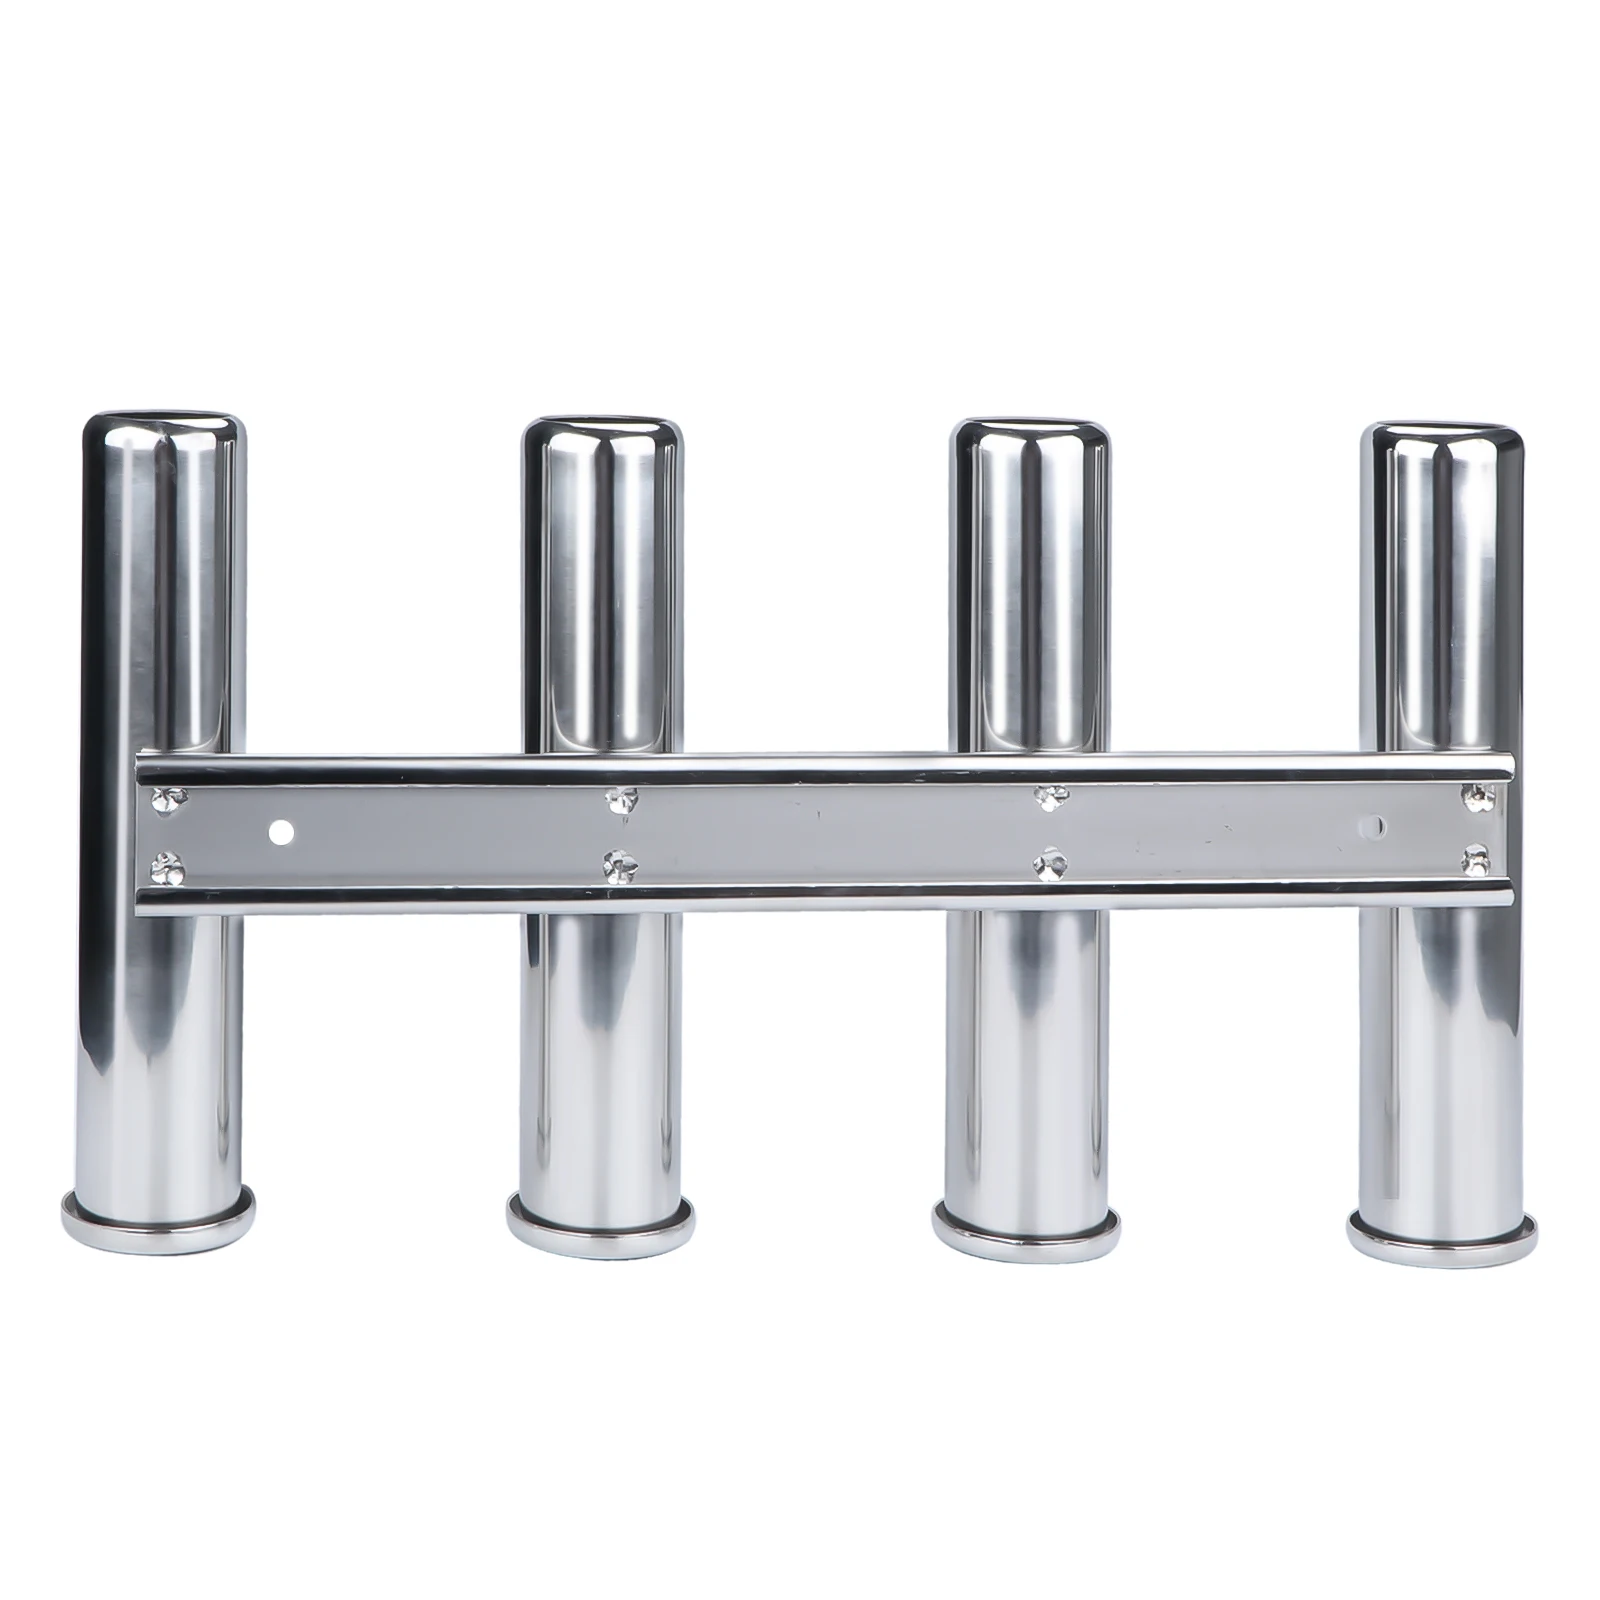 4 Tube Rod Holder Triple Stainless Steel Vertical Multi-use Fishing Rod Holder Wall-hung Style For Boat Yacht